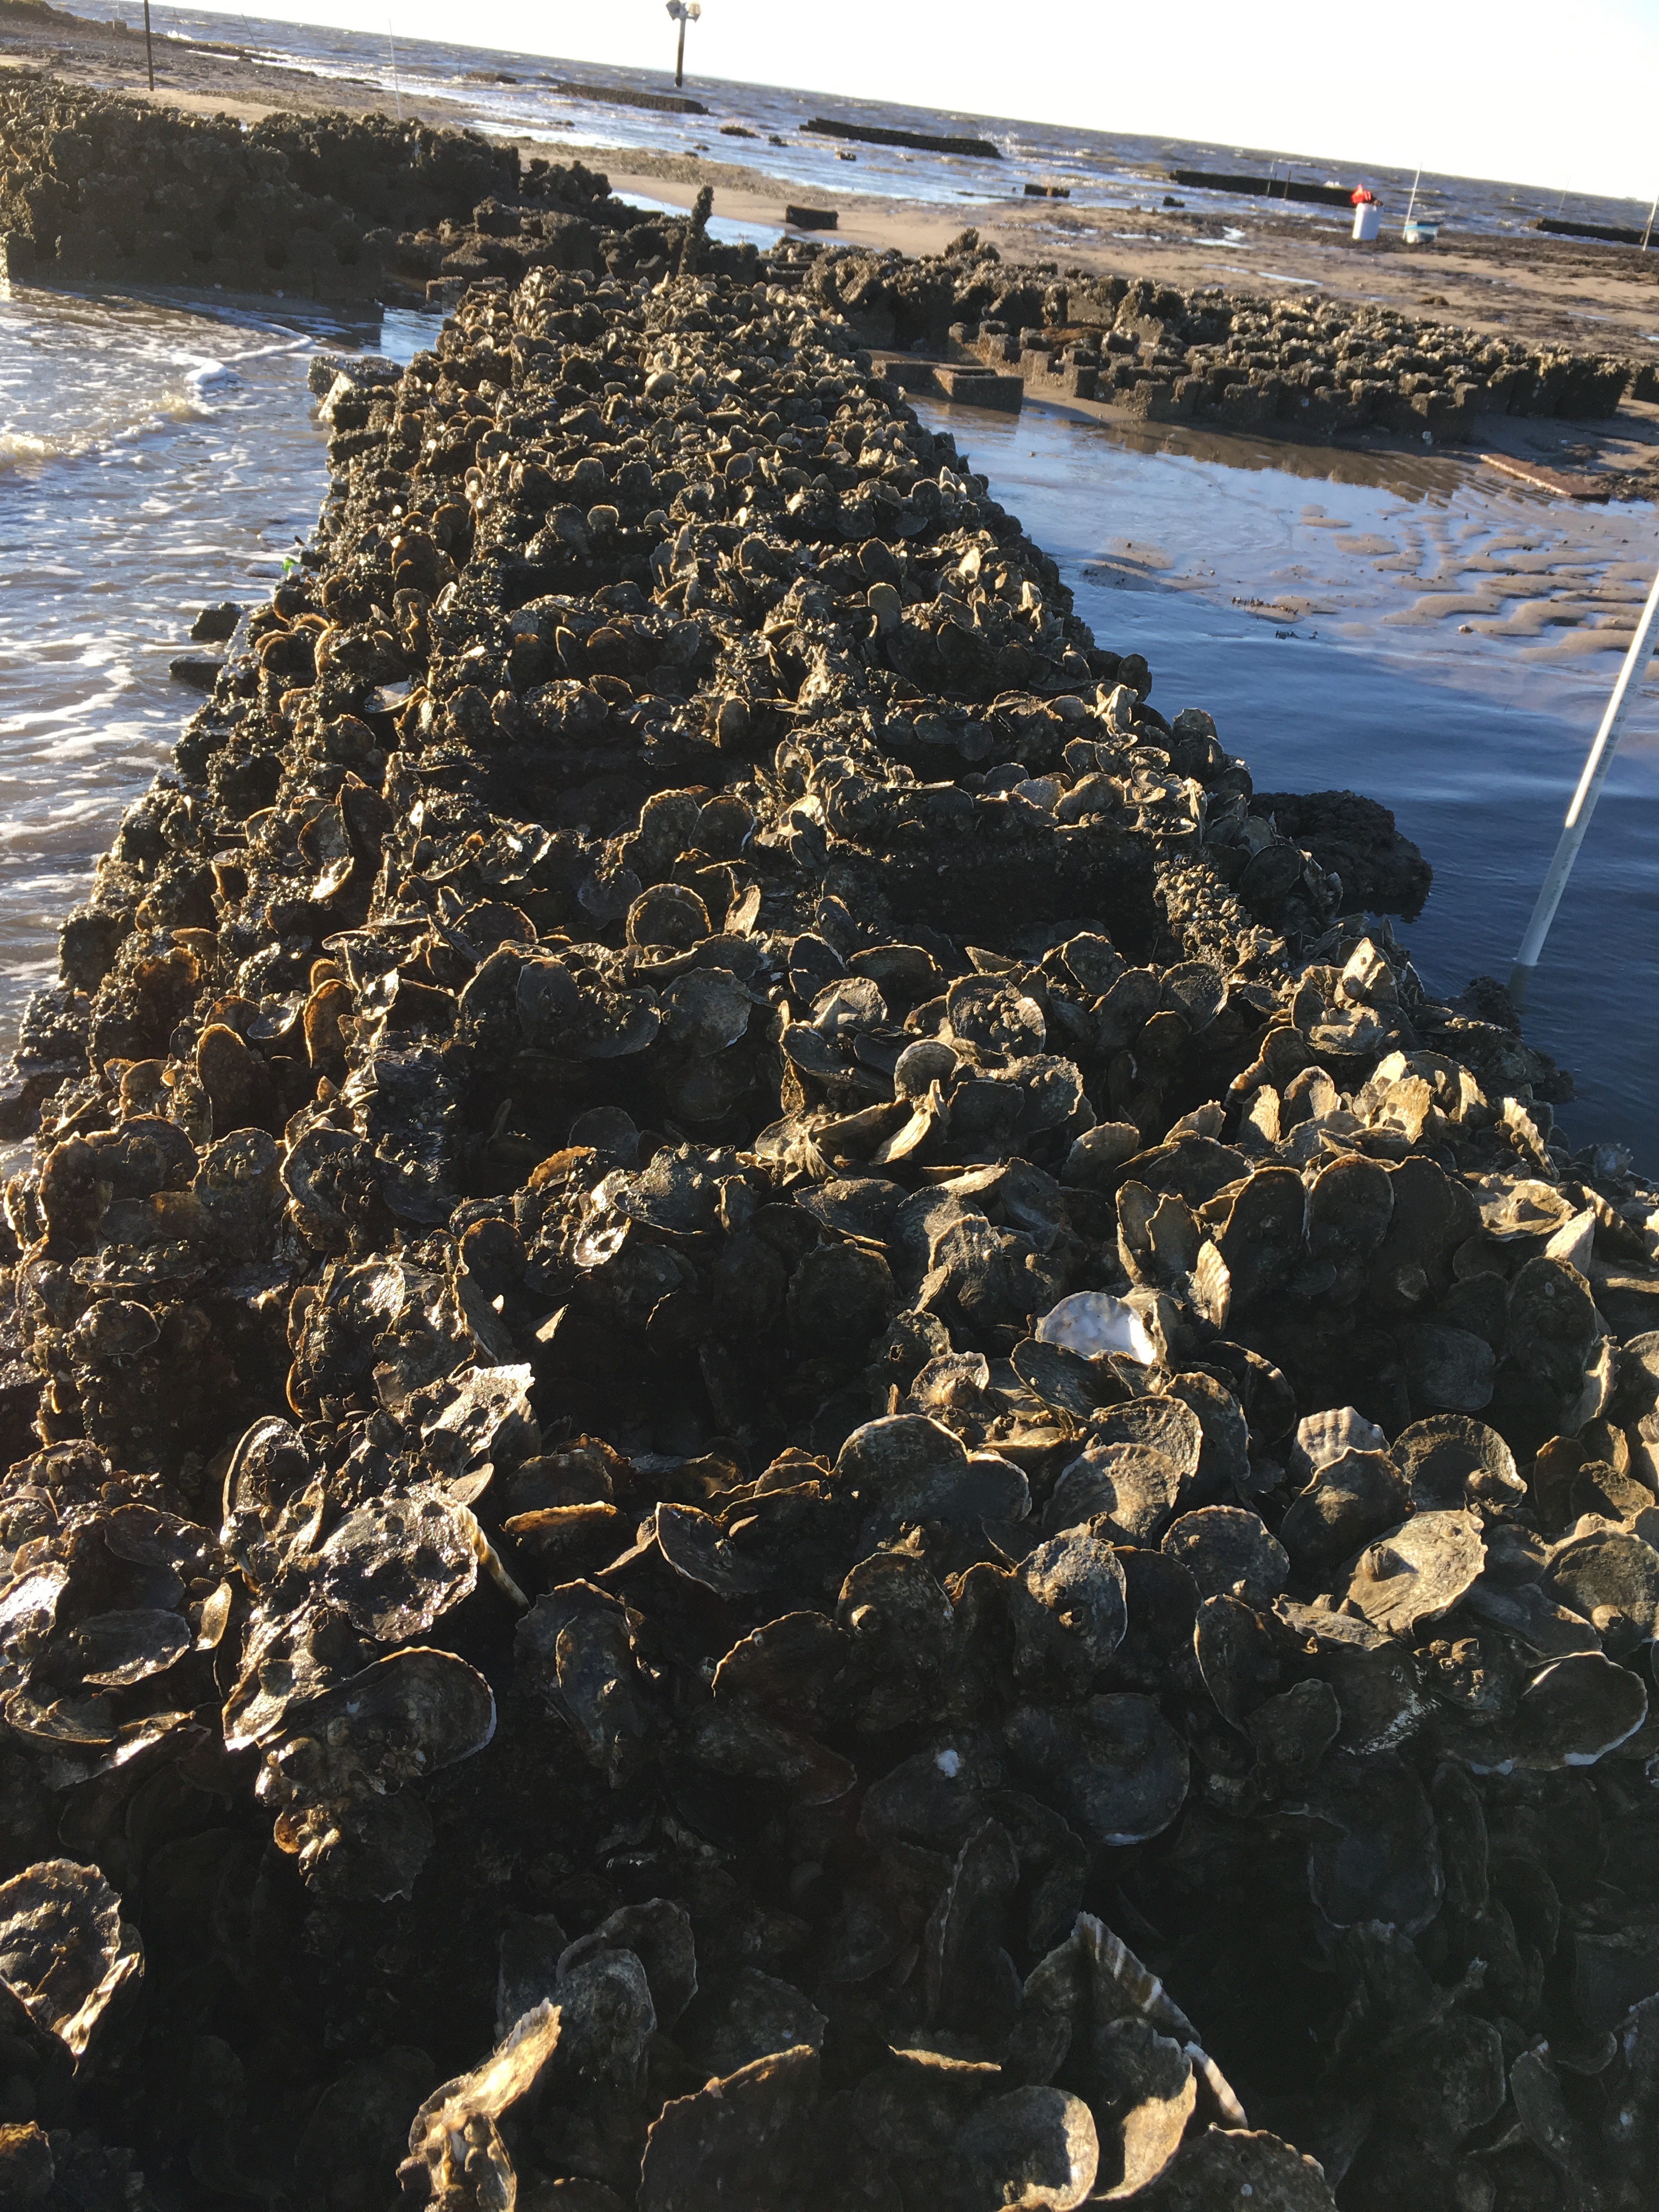 One and two year-old oysters growing on Oyster Castle reefs in the Delaware Bay as part of the Gandy's Beach Living Shoreline Project. The reefs are designed to act as breakwater structures to reduce wave energy approaching the shore and as habitat for shellfish and associated species.